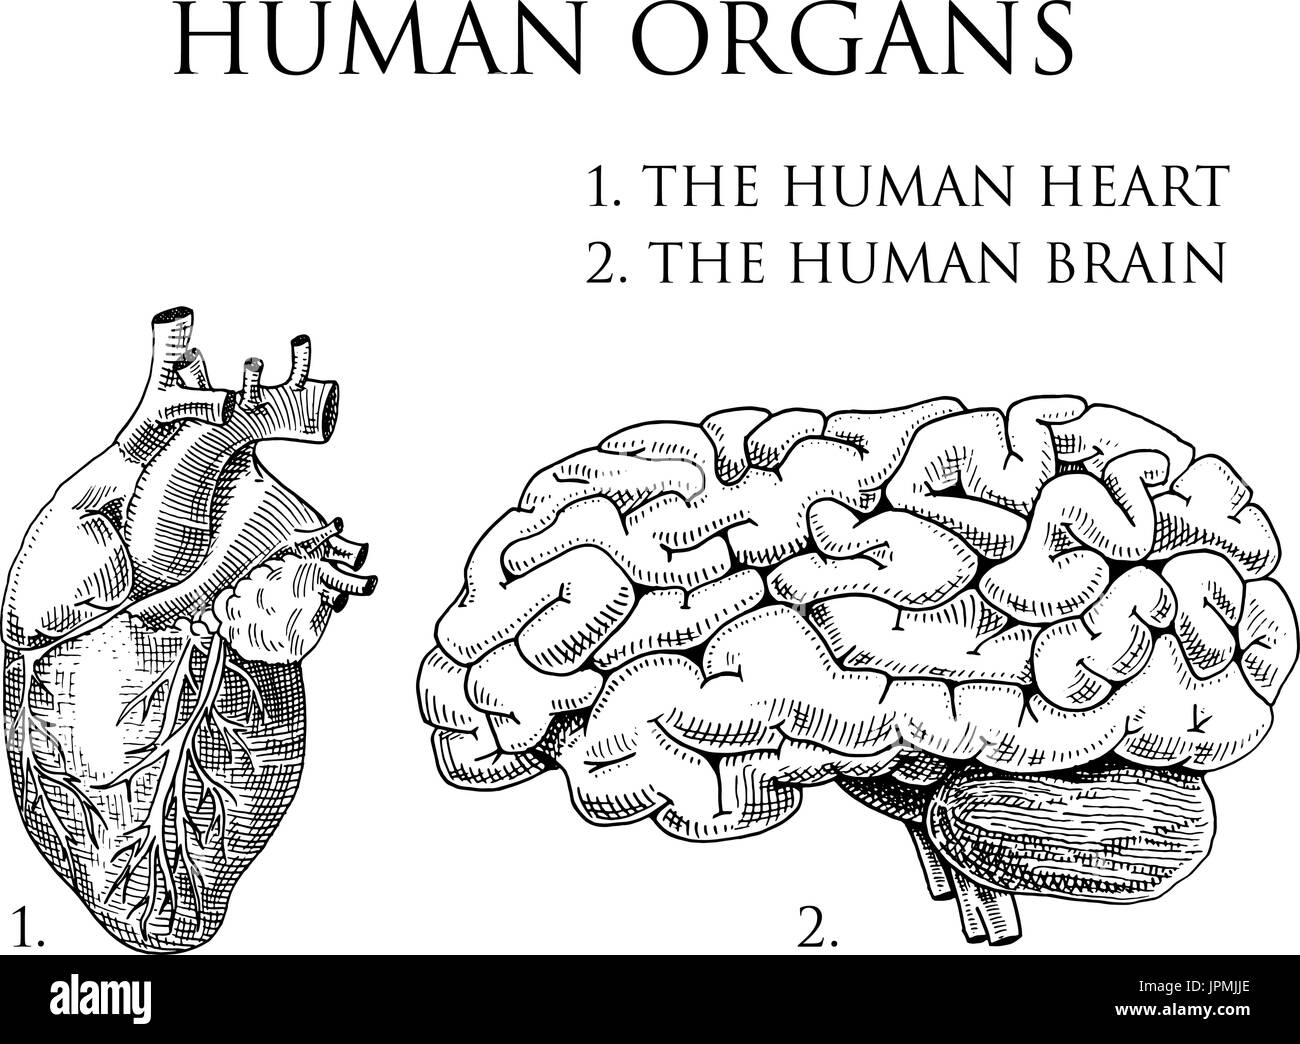 Human biology, organs anatomy illustration. engraved hand drawn in old sketch and vintage style. body detailed brain or pericranium and heart or soul. Stock Vector